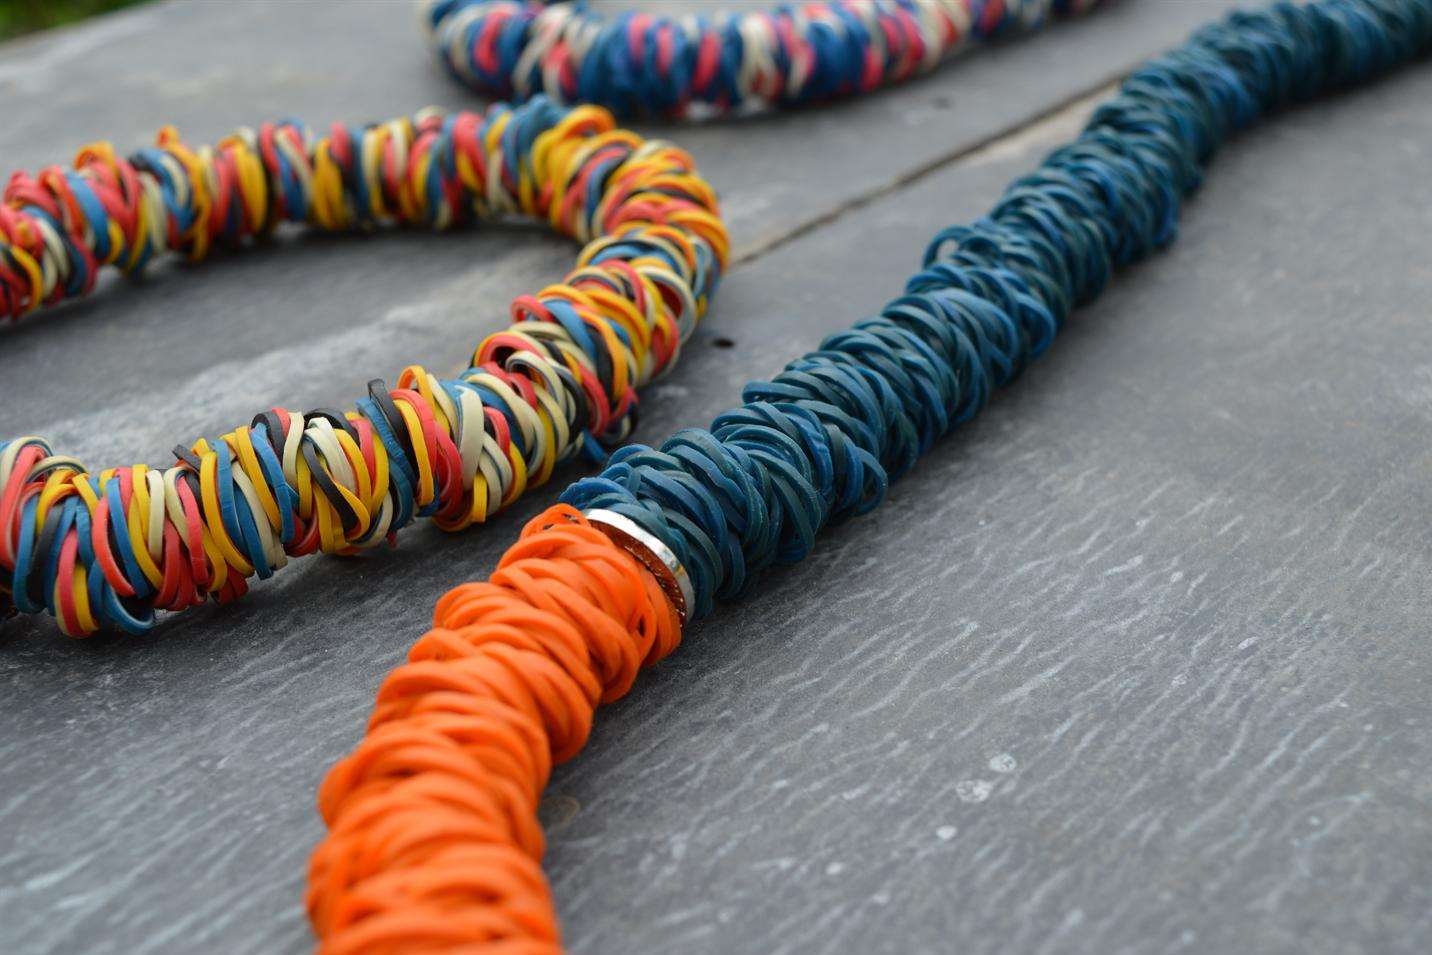 Necklaces made from natural latex rubber bands created in Kerala, India